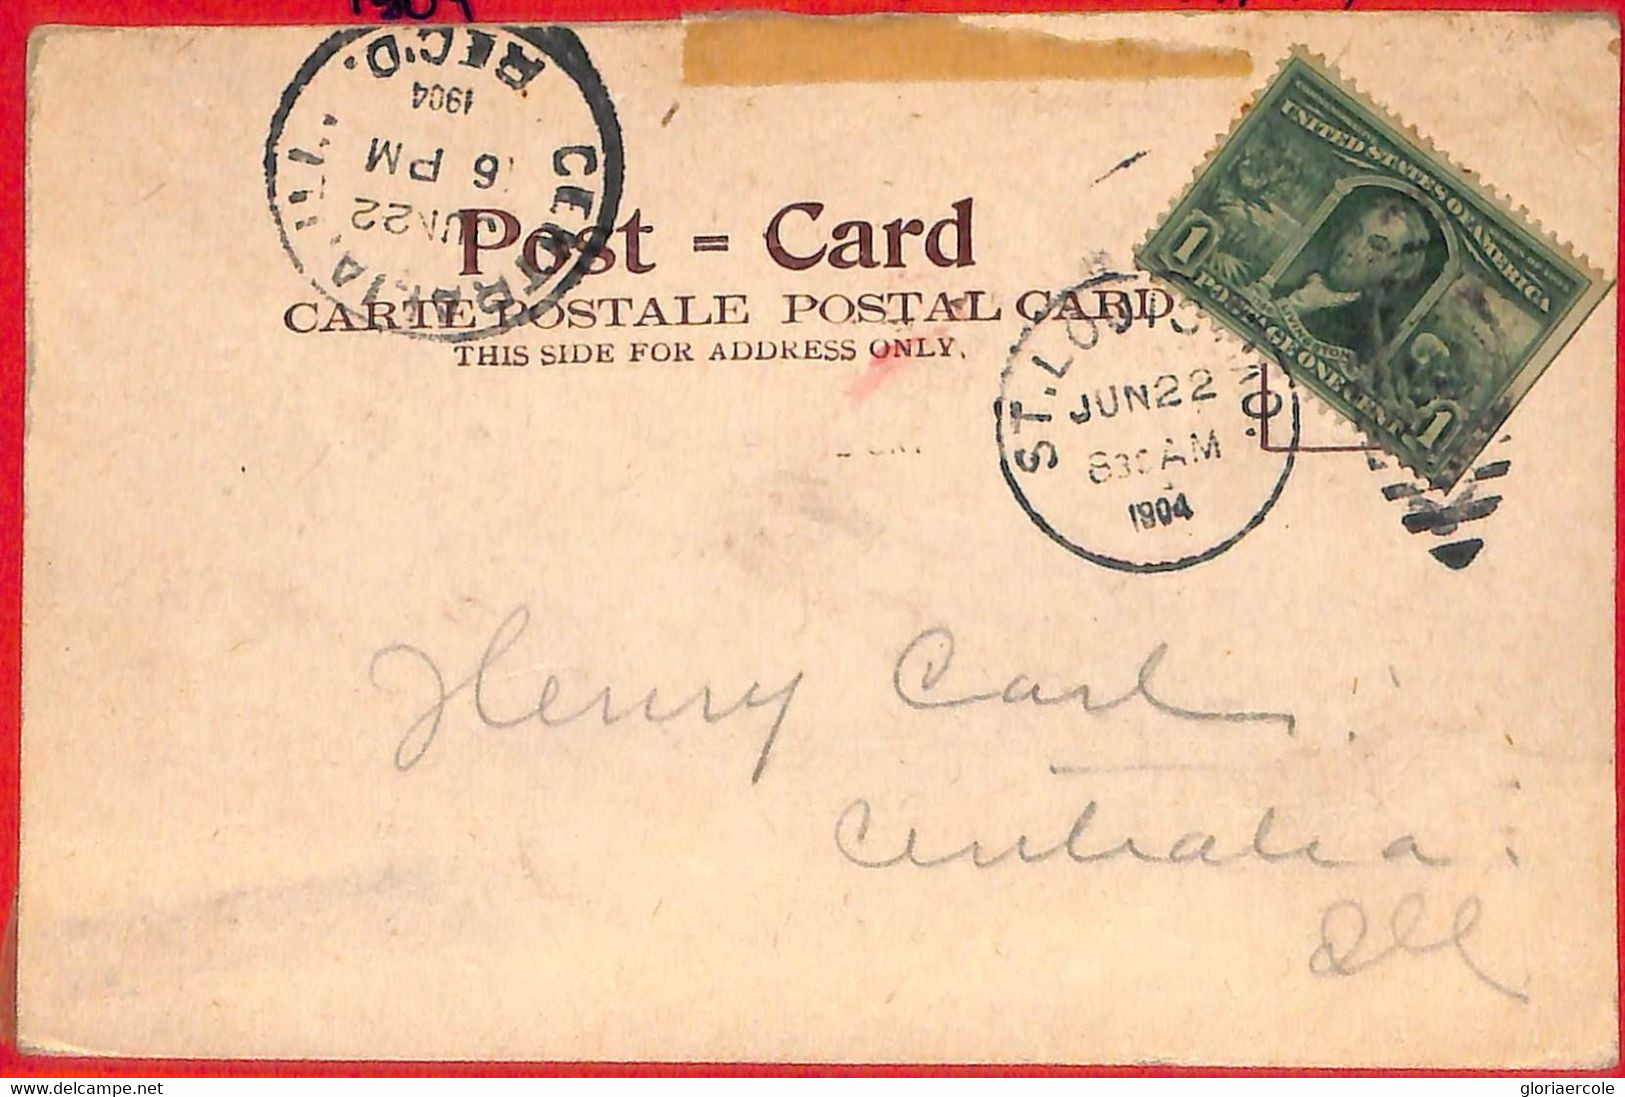 Aa2569 - USA - POSTAL HISTORY - CARD From ST LOUIS 9 Days B4 1904 Olympic Games - Verano 1904: St-Louis